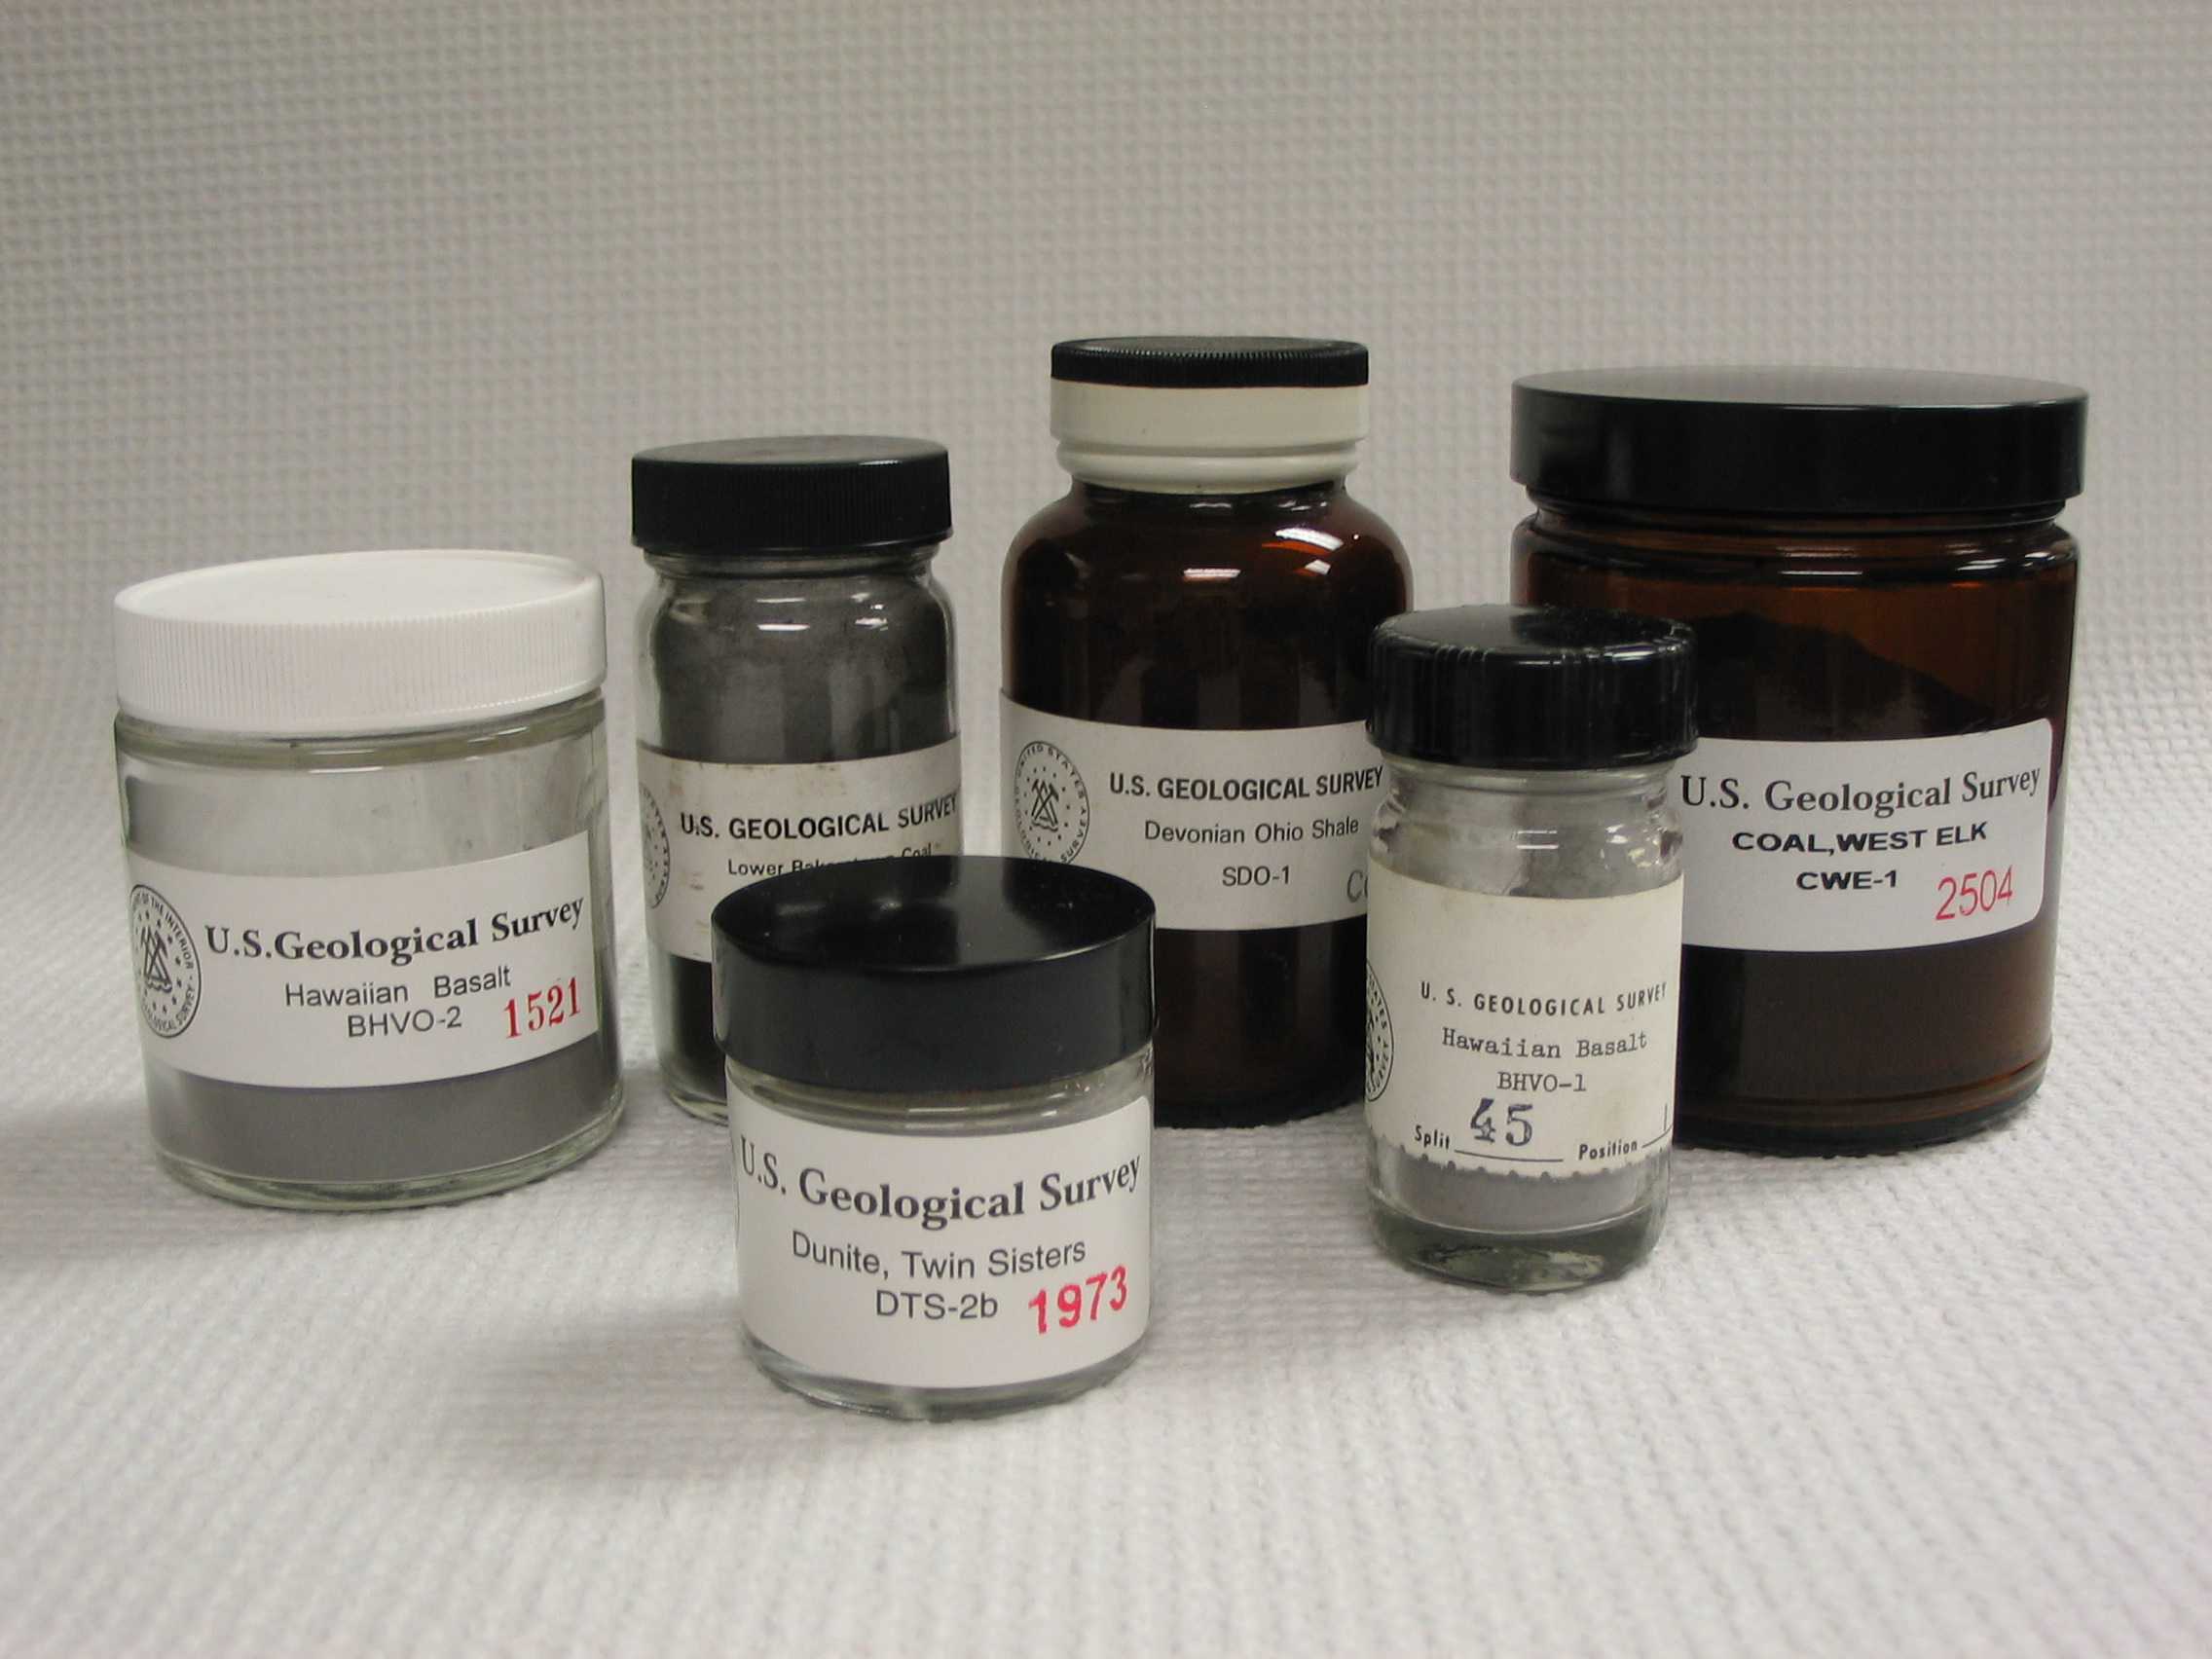 Photo of geochemical reference materials in bottles and jars.